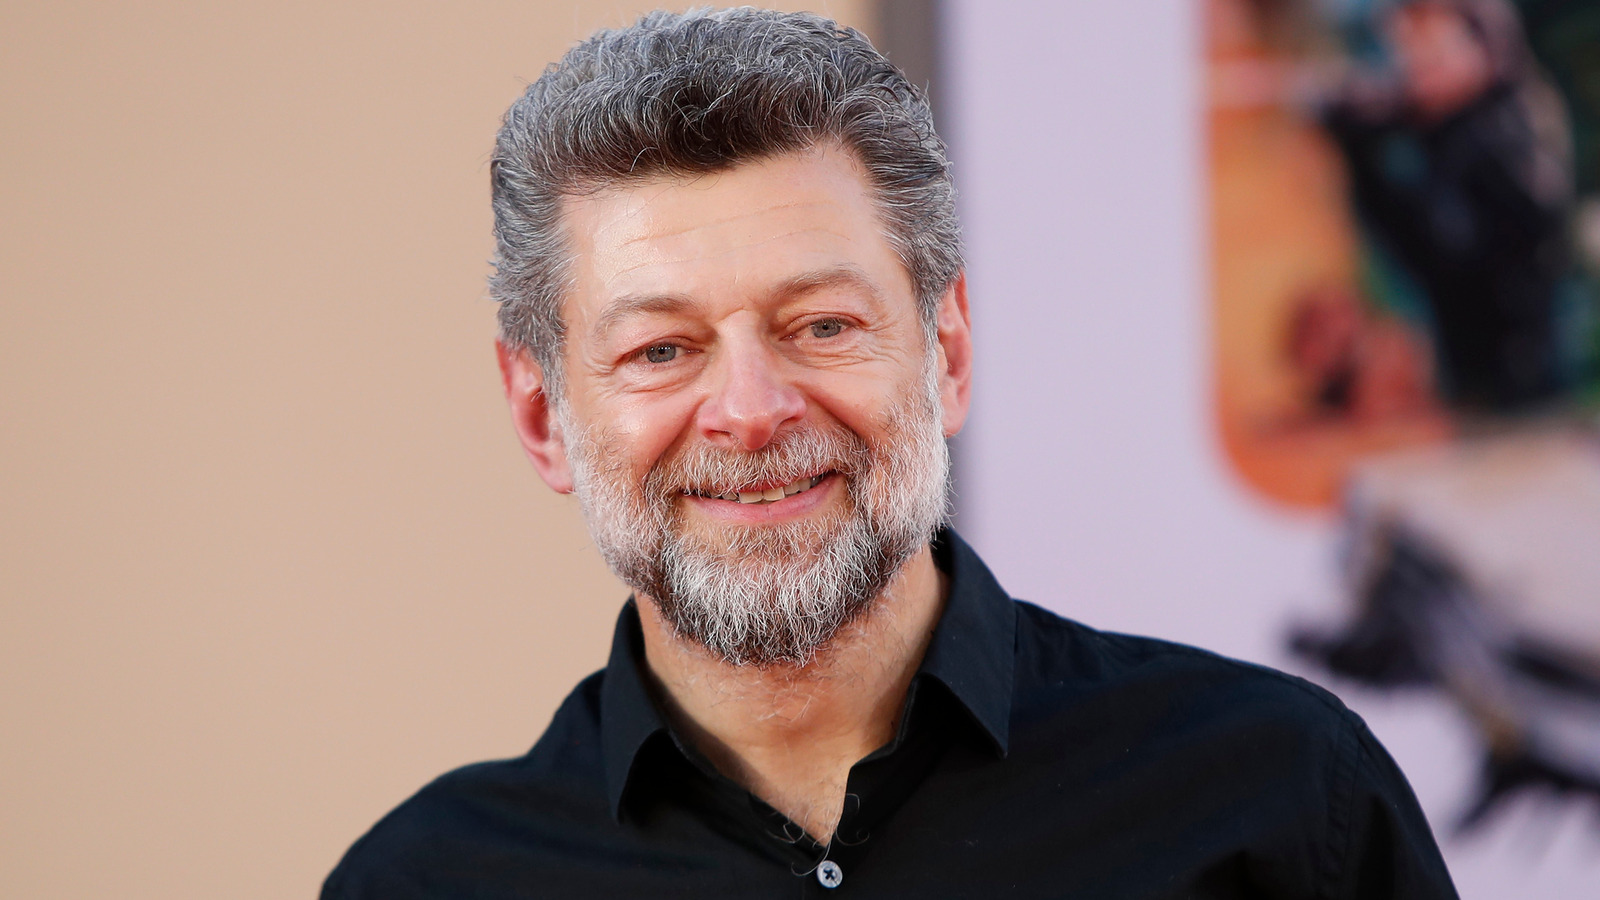 My Precious!' Andy Serkis talks about being Gollum and the new